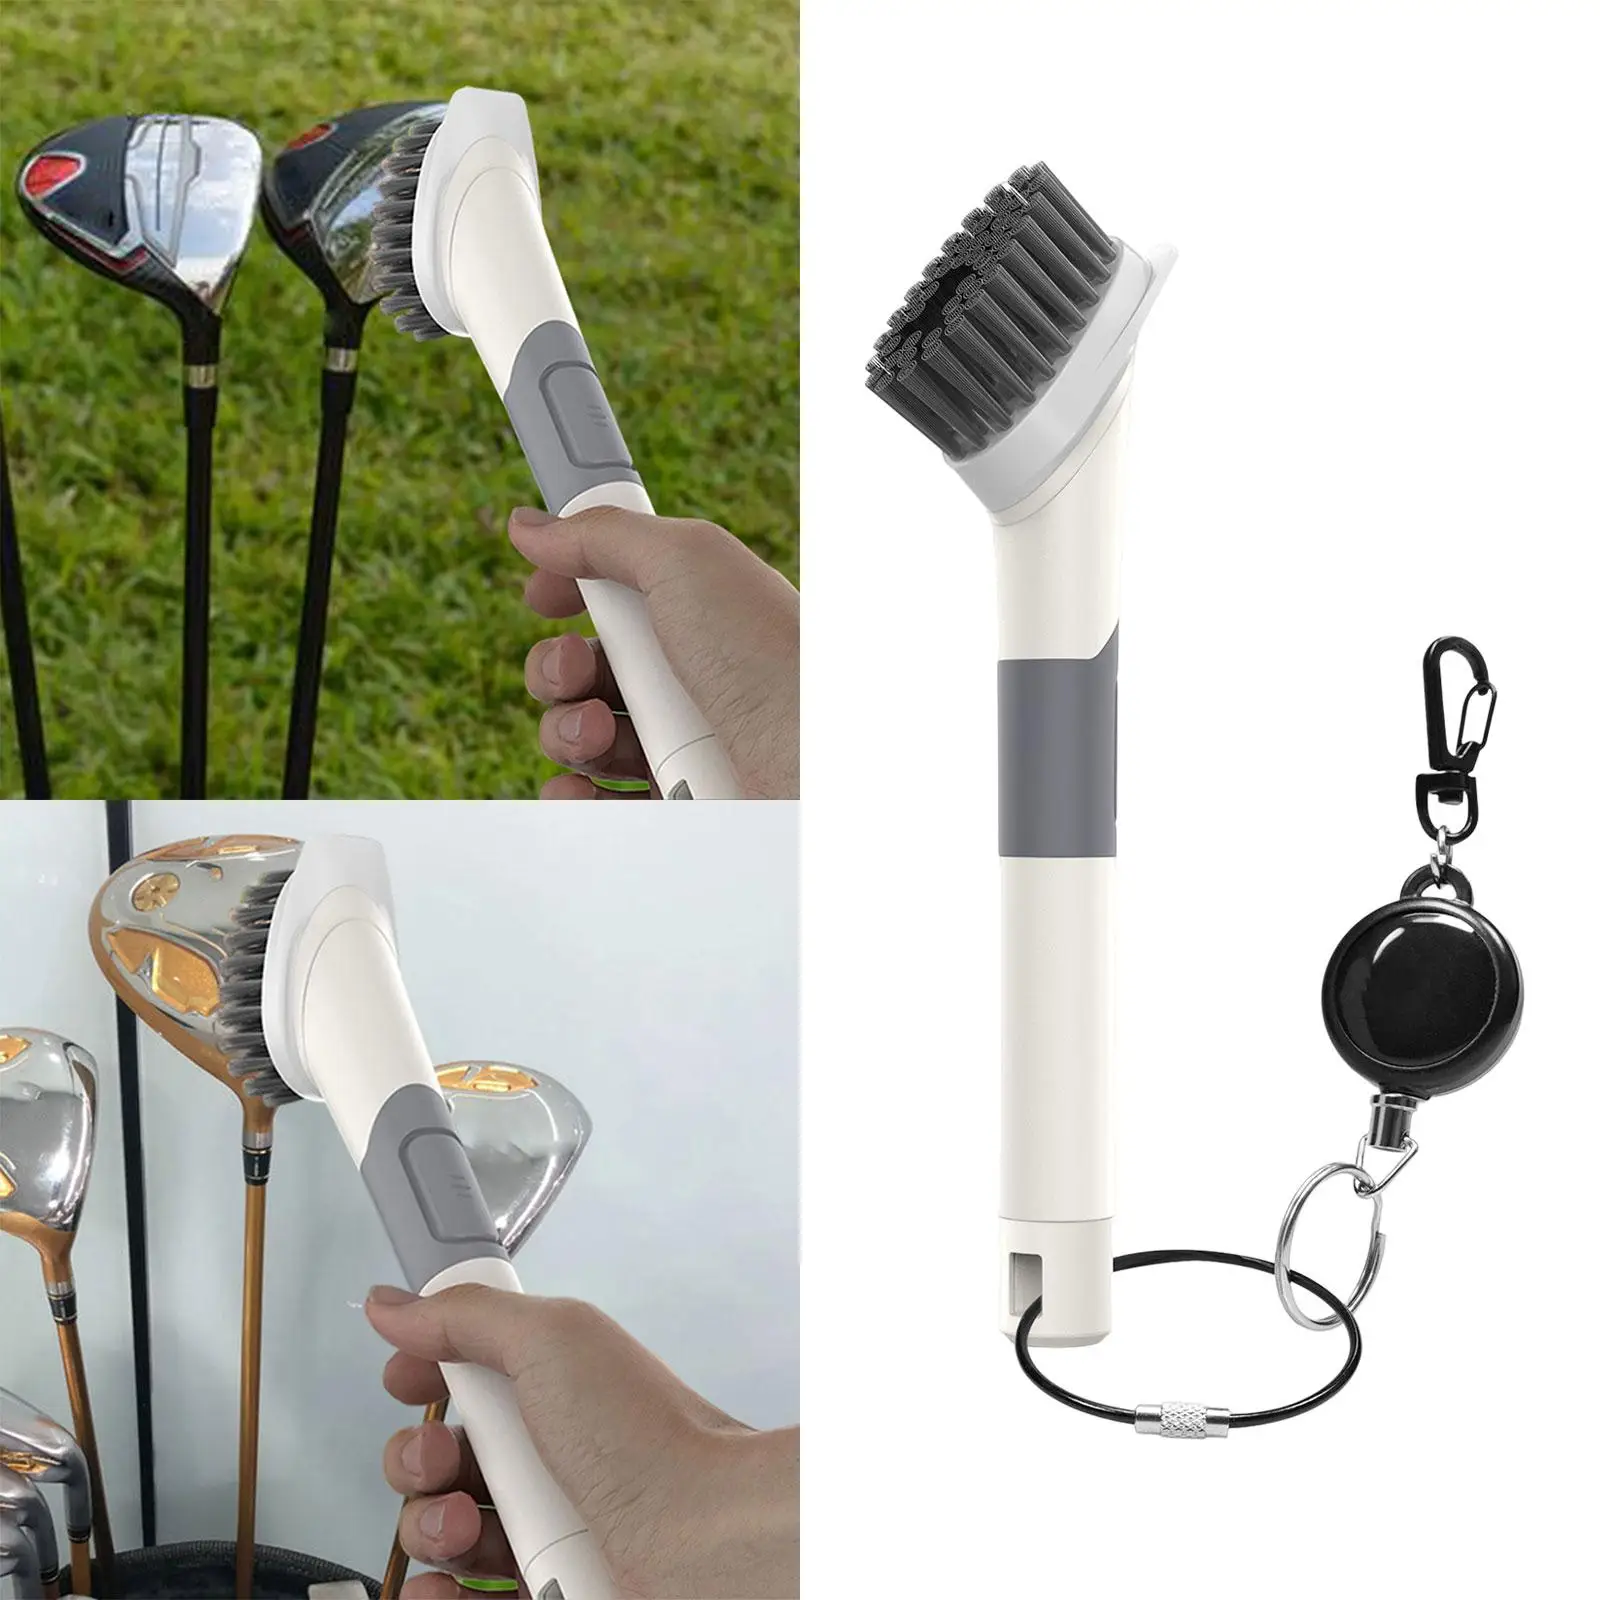 Golf Club Cleaner Cleaning Brushes Golf Tool Portable for Men Golf Gifts